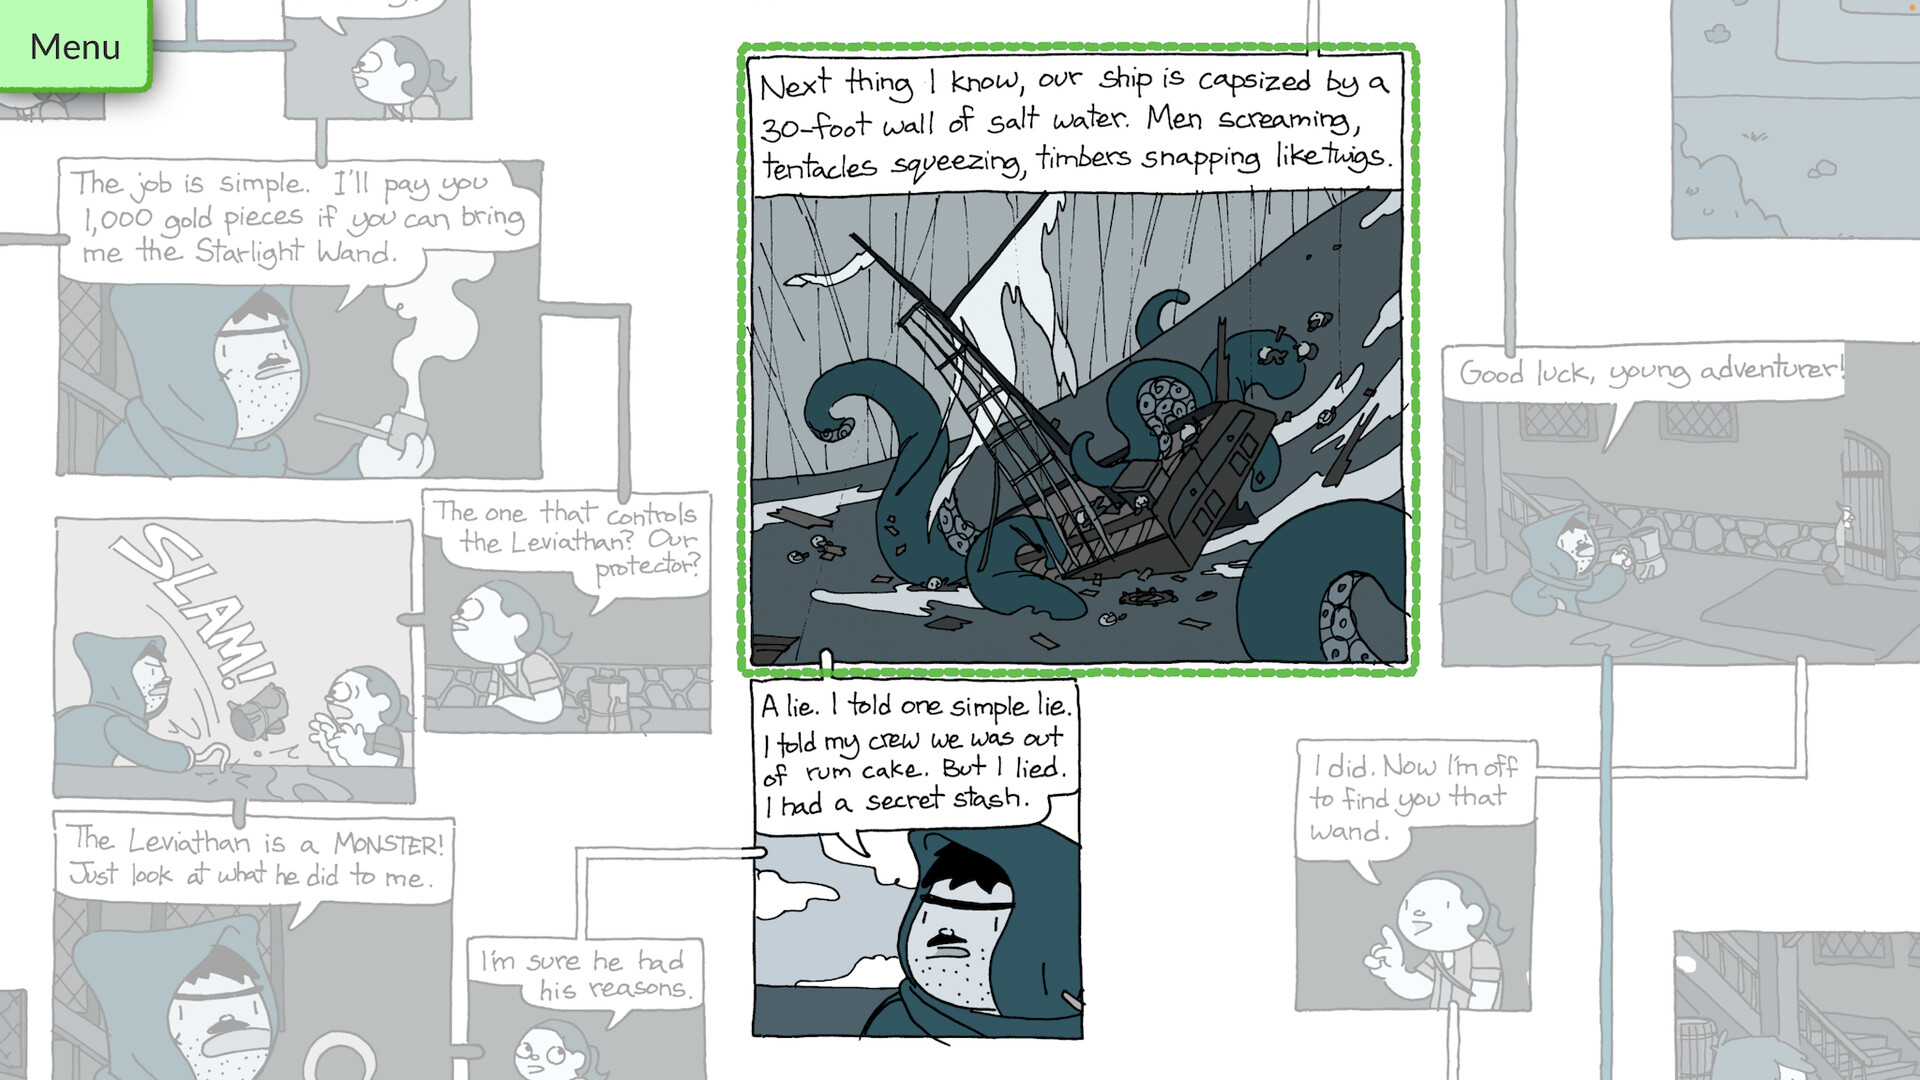 Leviathan: An Interactive Comic Book Free Download